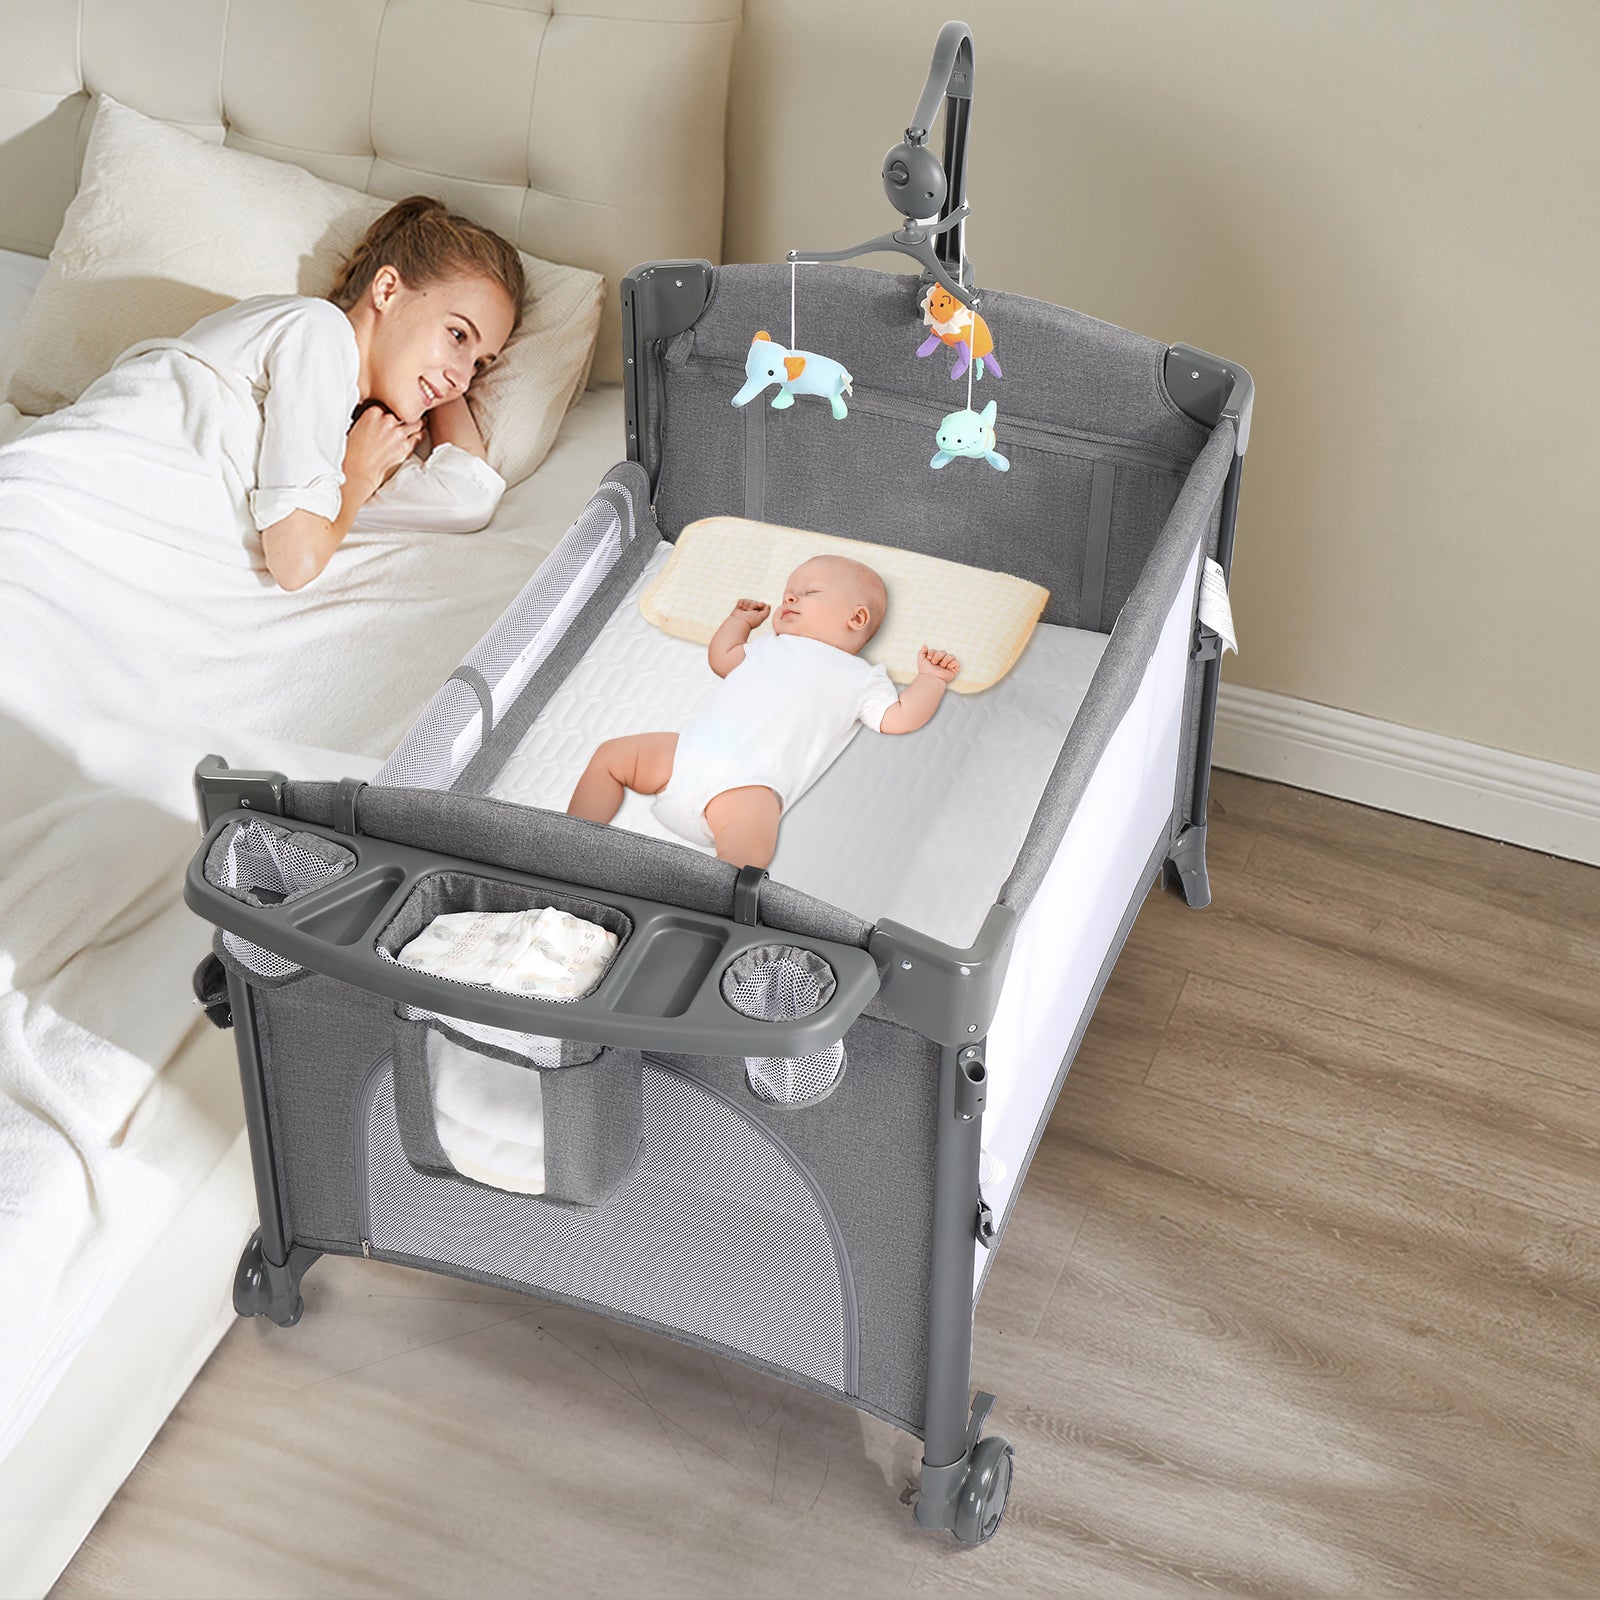 3 In 1 Baby Bedside Crib,Baby Bassinets Bedside Sleeper,Portable Crib,baby  bassinets bedside sleeper Attach To Bed,breathable and visible mesh window